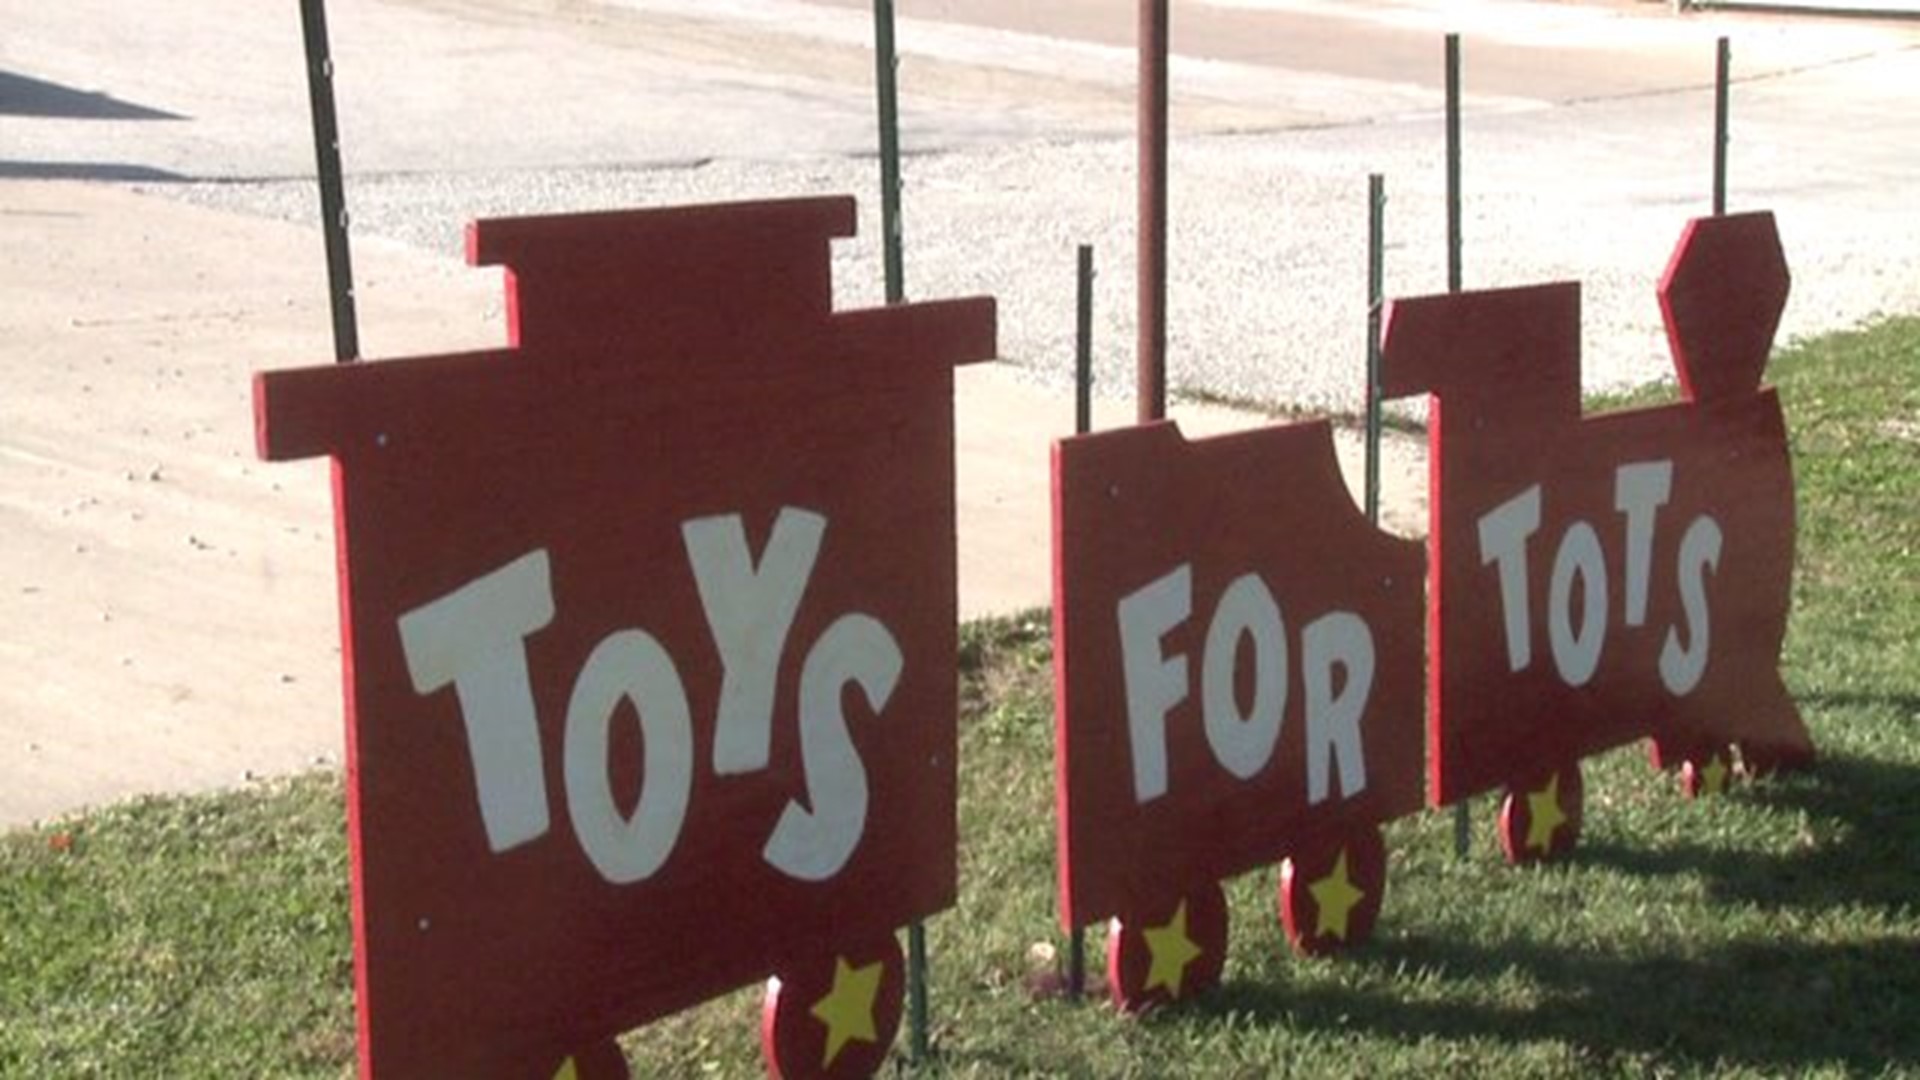 Bring birth certificates to Toys for Tots registration